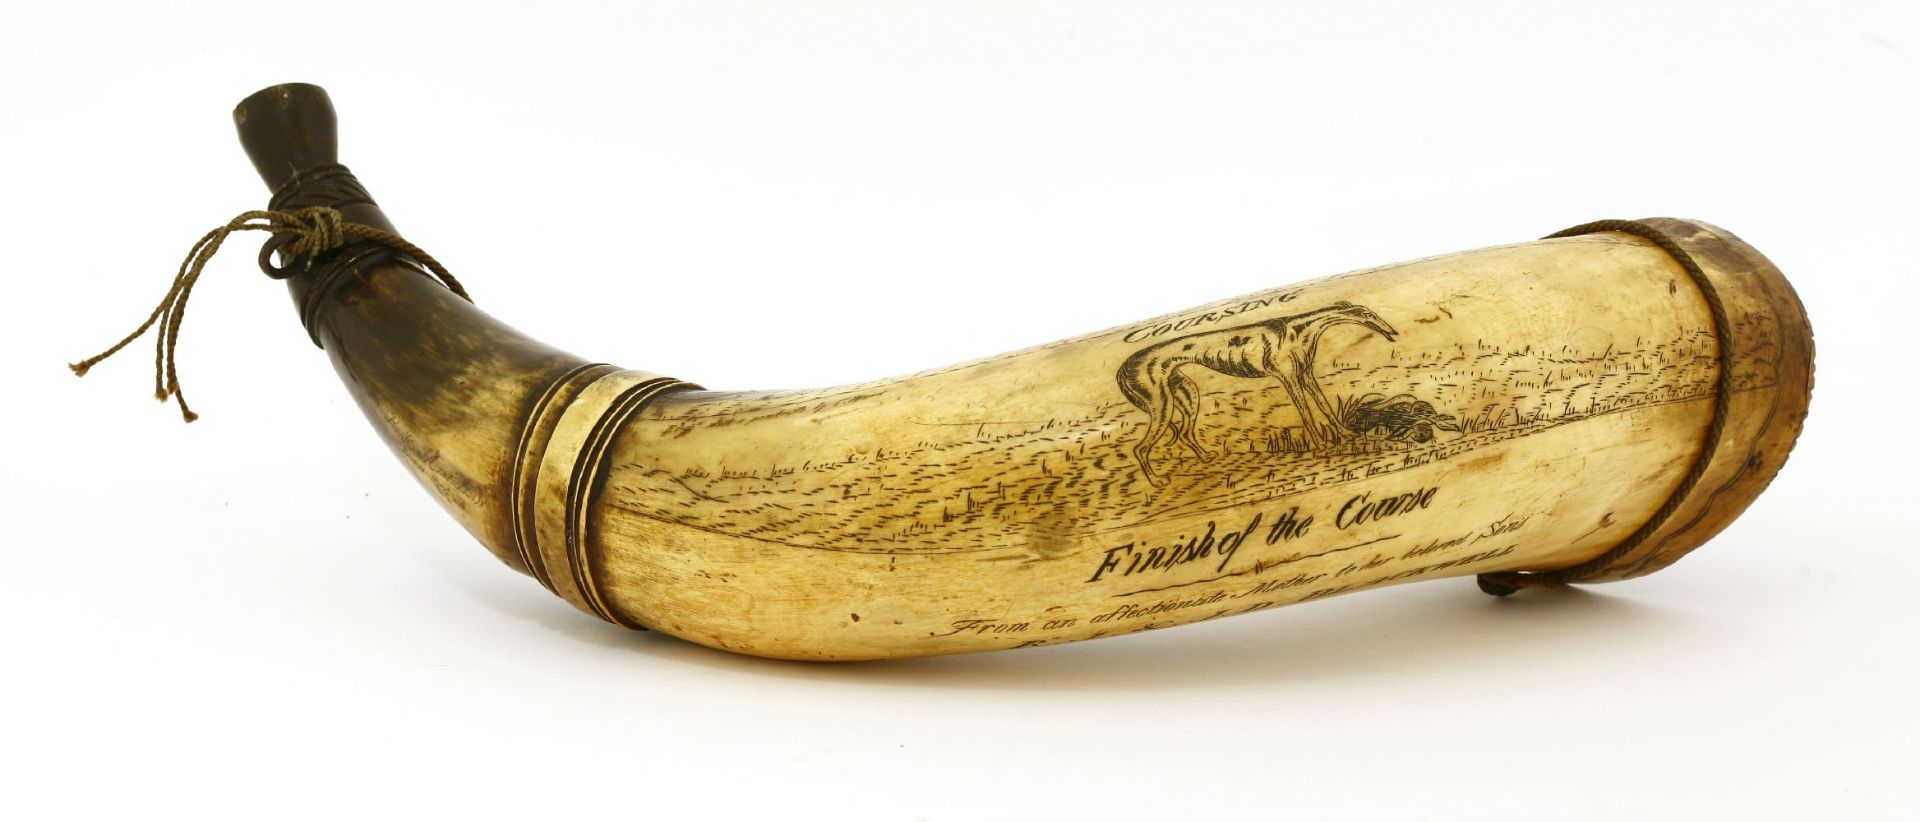 A scrimshaw hunting horn,mid-19th century, depicting hare coursing scenes, and inscribed 'From an